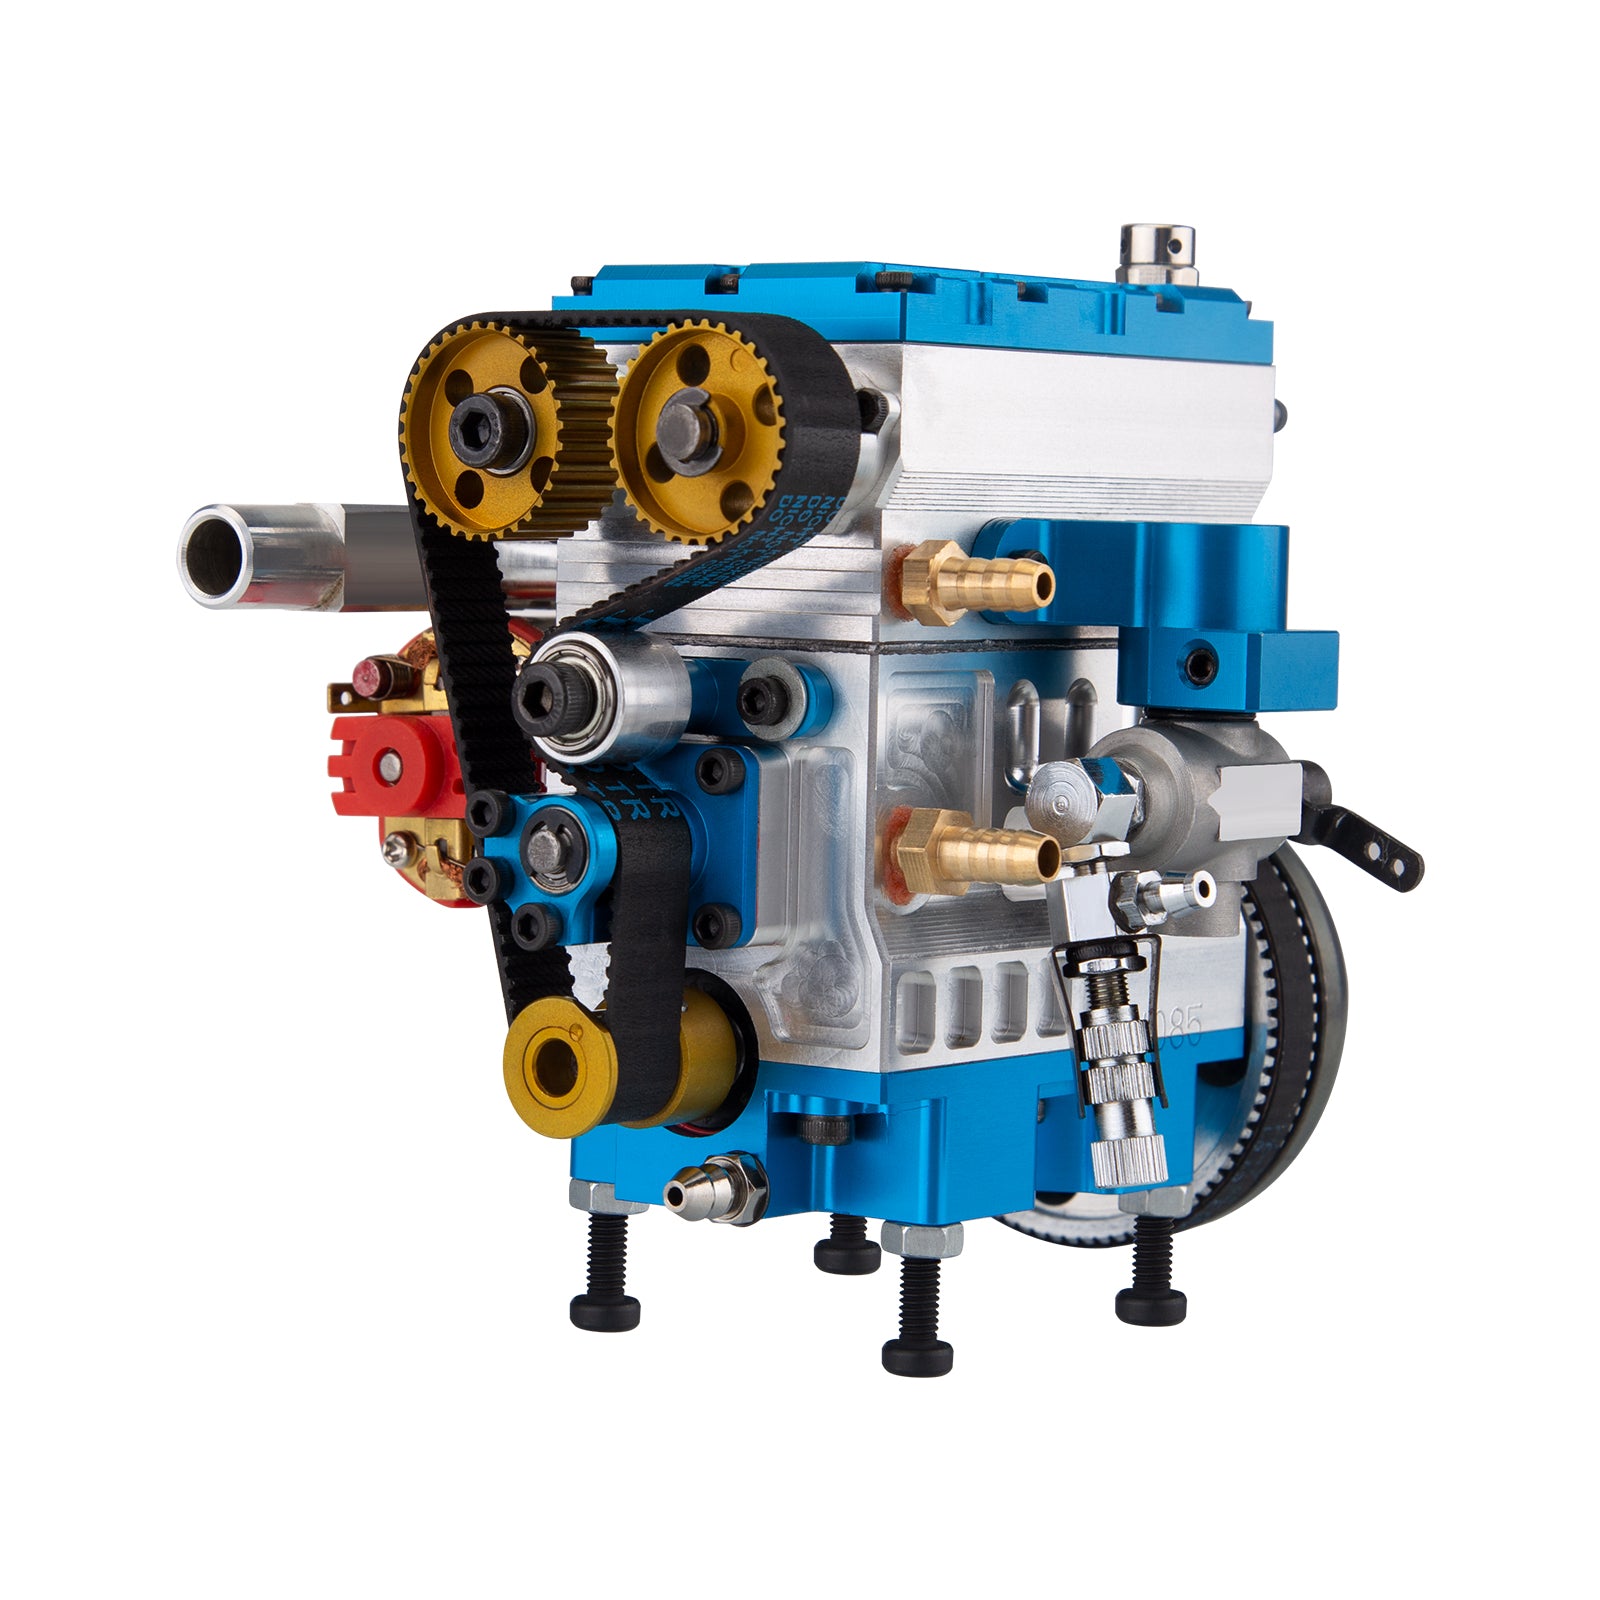 NR-200 8.6cc Inline 2-cylinder 4-stroke Water-cooled Electric